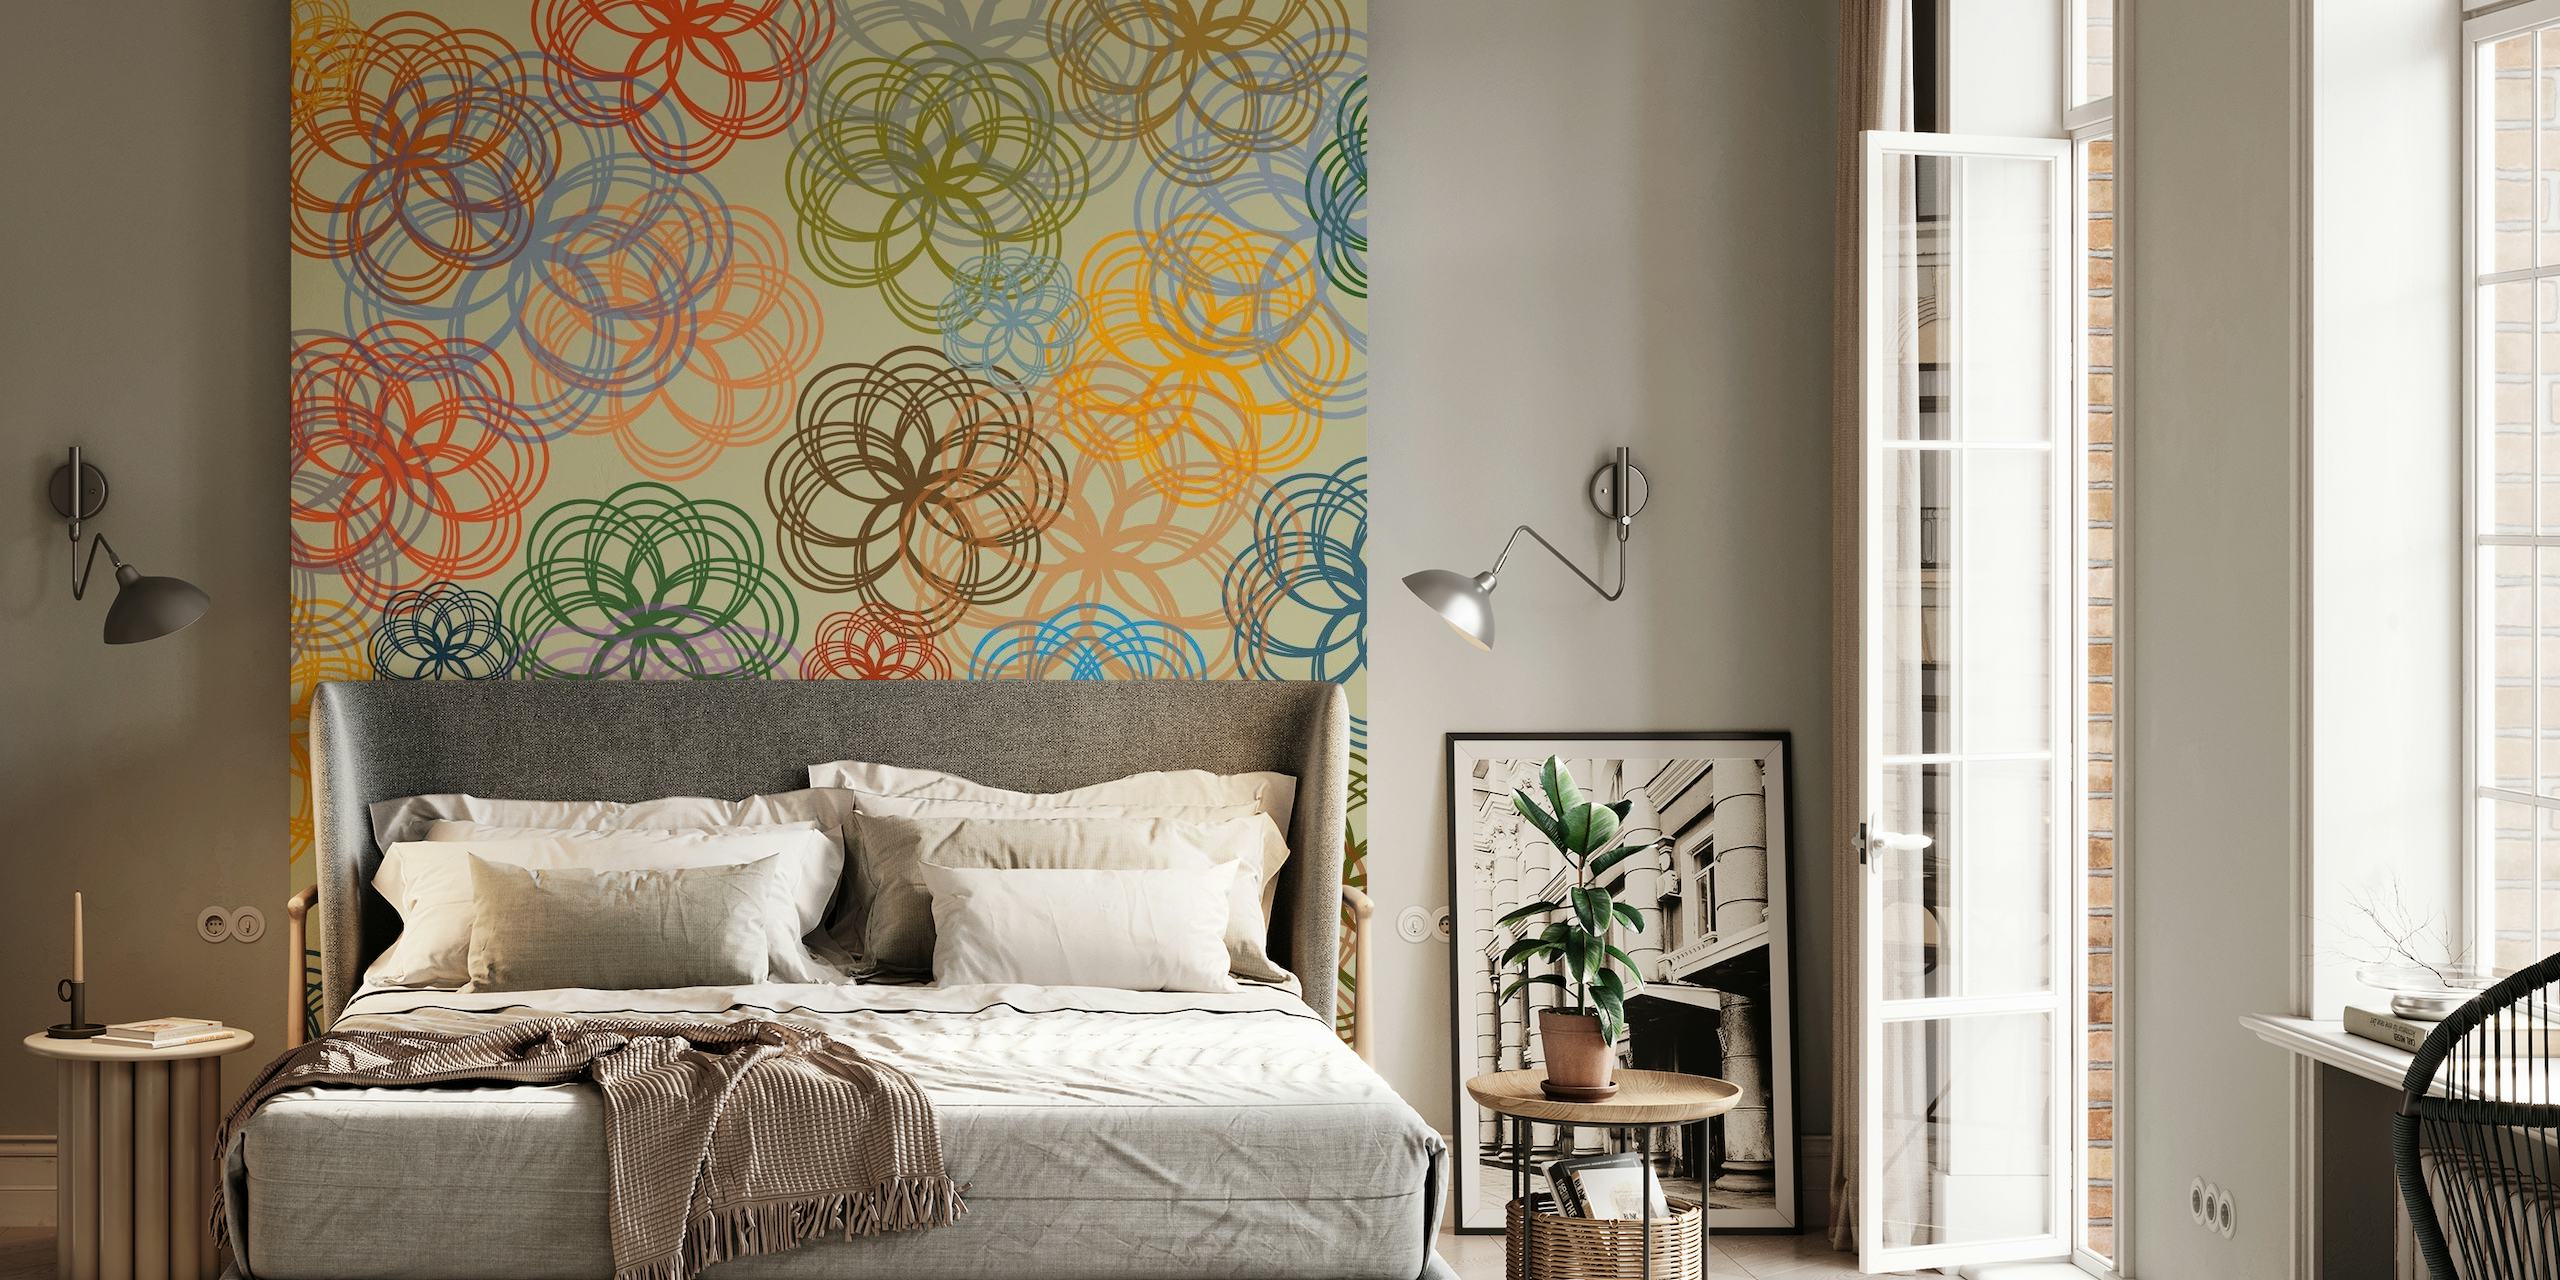 Abstract geometric floral patterns wall mural in a pastel color scheme